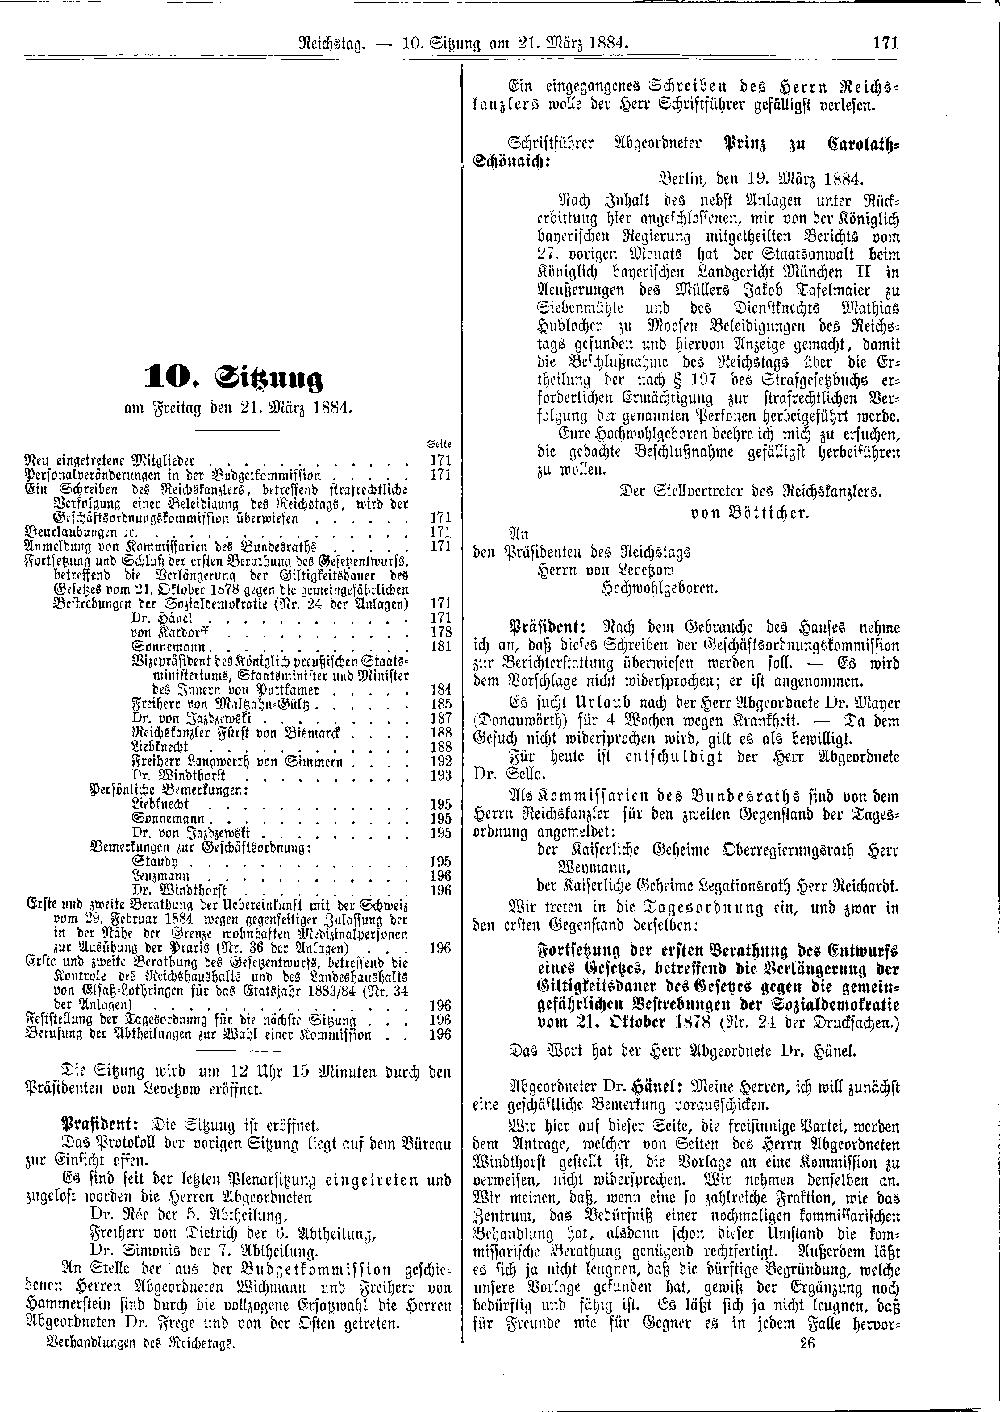 Scan of page 171